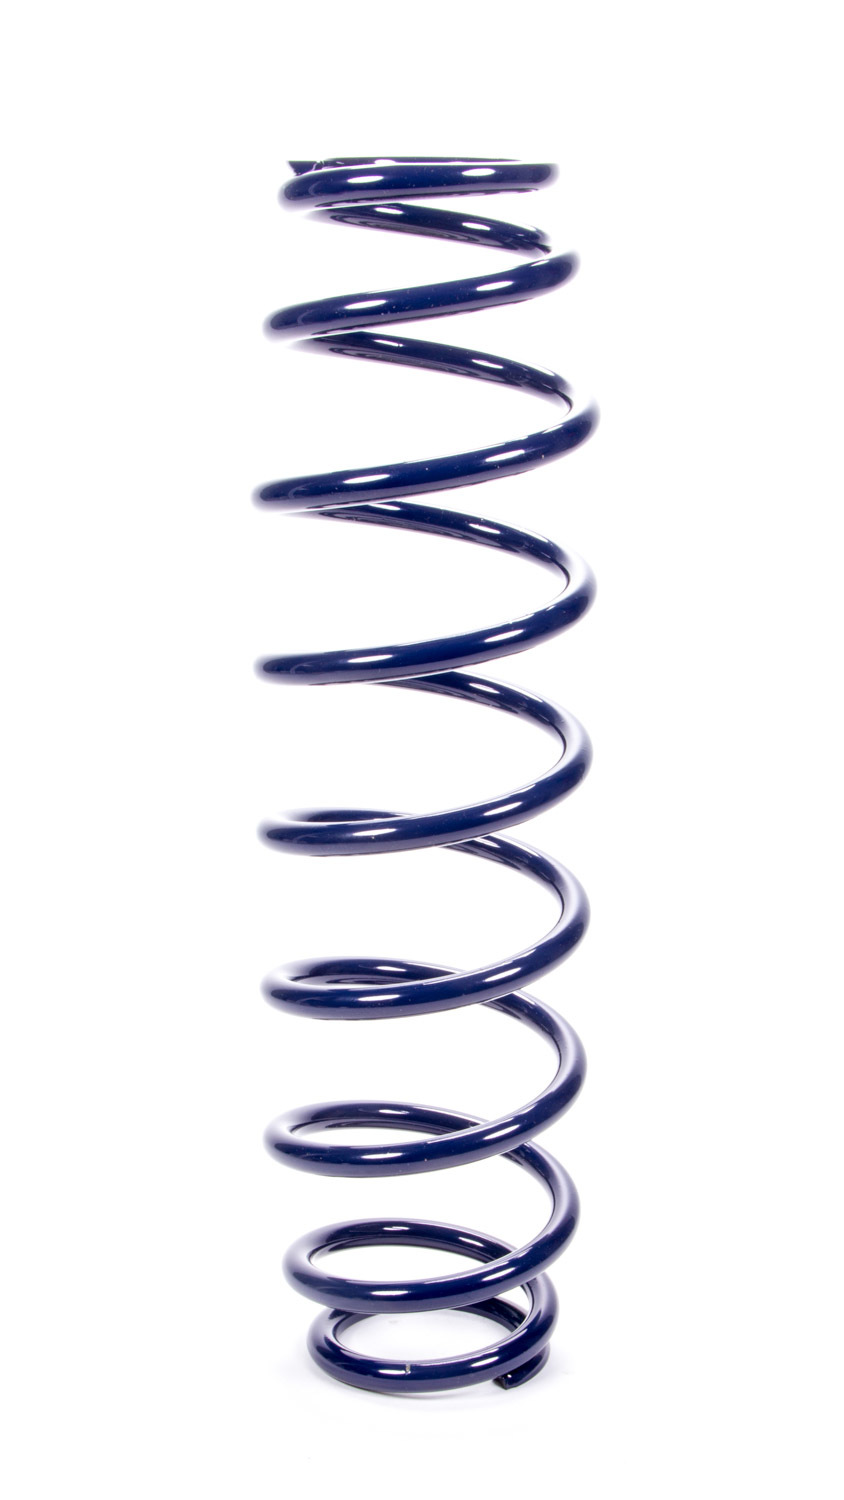 Hyperco 16B0200UHT Coil Spring, UHT Barrel, Coil-Over, 2.500 in ID, 16.000 in Length, 200 lb/in Spring Rate, Steel, Blue Powder Coat, Each